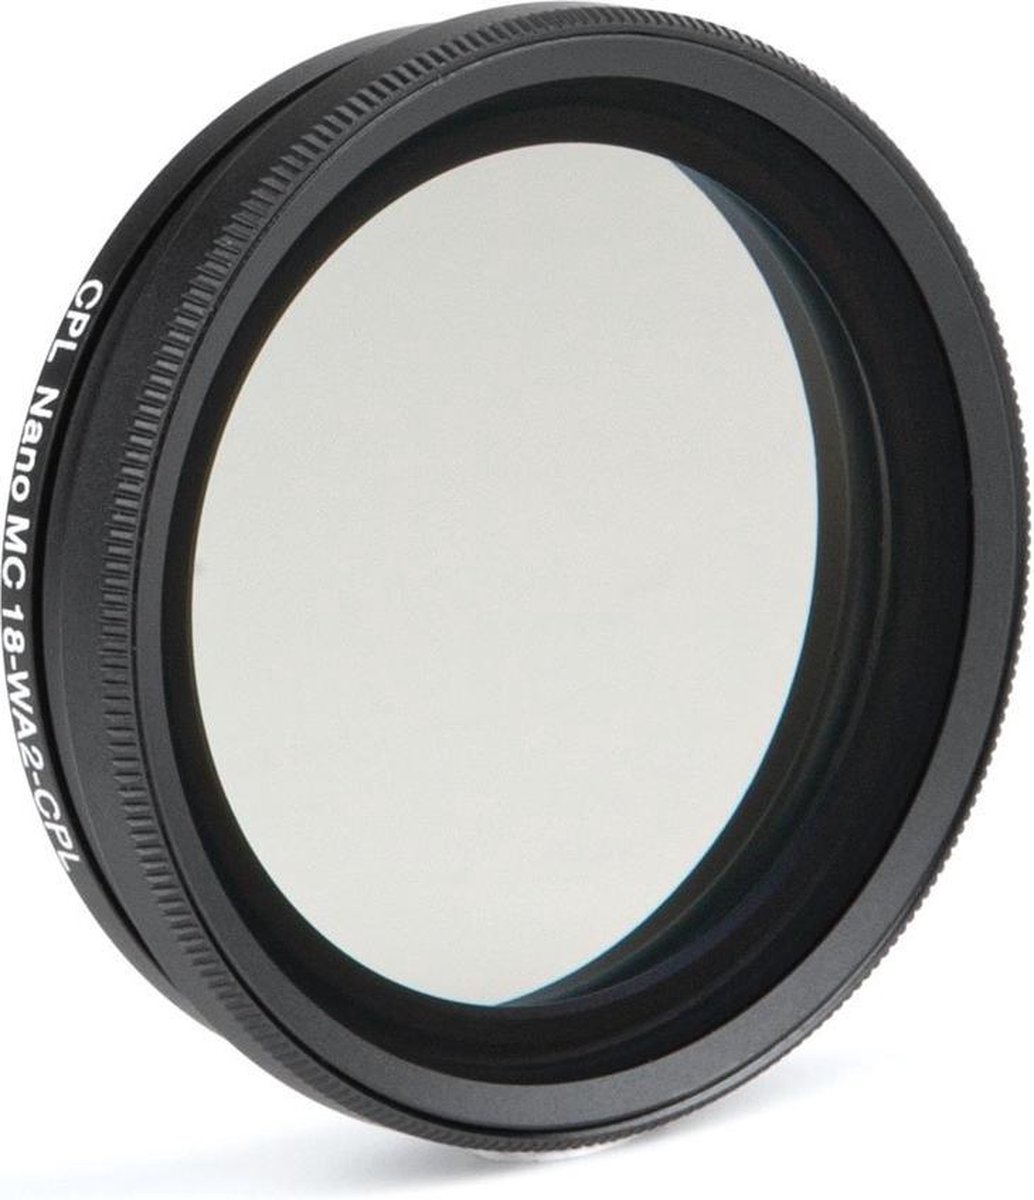 Sirui Polarizer Filter for Wideangle Lens II (18mm)